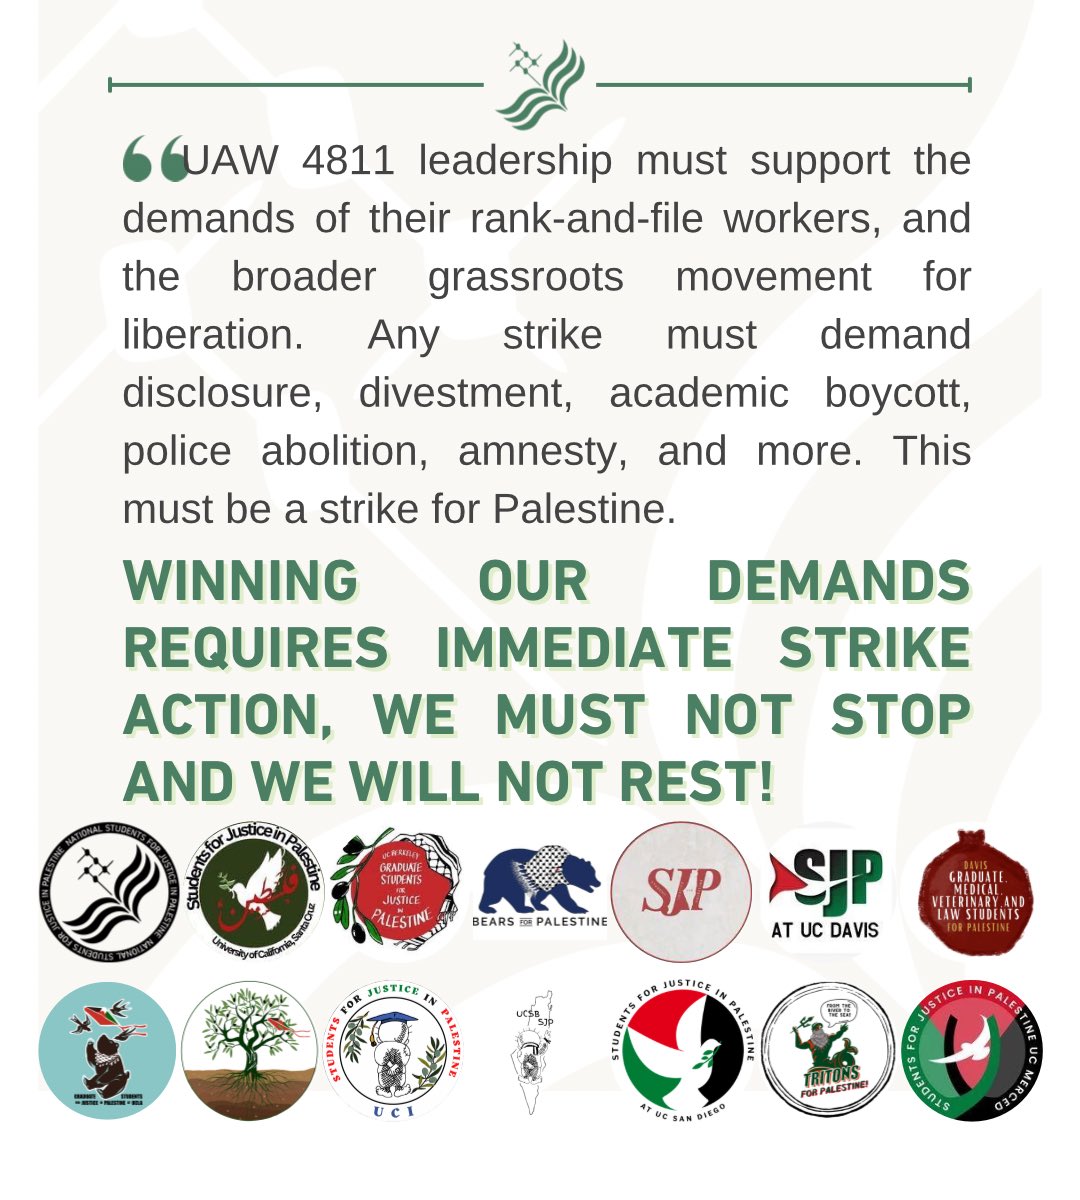 🚨UC SJP STATEMENT ON A STRIKE FOR PALESTINIAN LIBERATION🚨 UC Students for Justice in Palestine celebrate the solidarity of UAW 4811 workers who overwhelmingly voted to authorize a strike. UAW 4811 must immediately call a strike at all University of California Campuses. Any